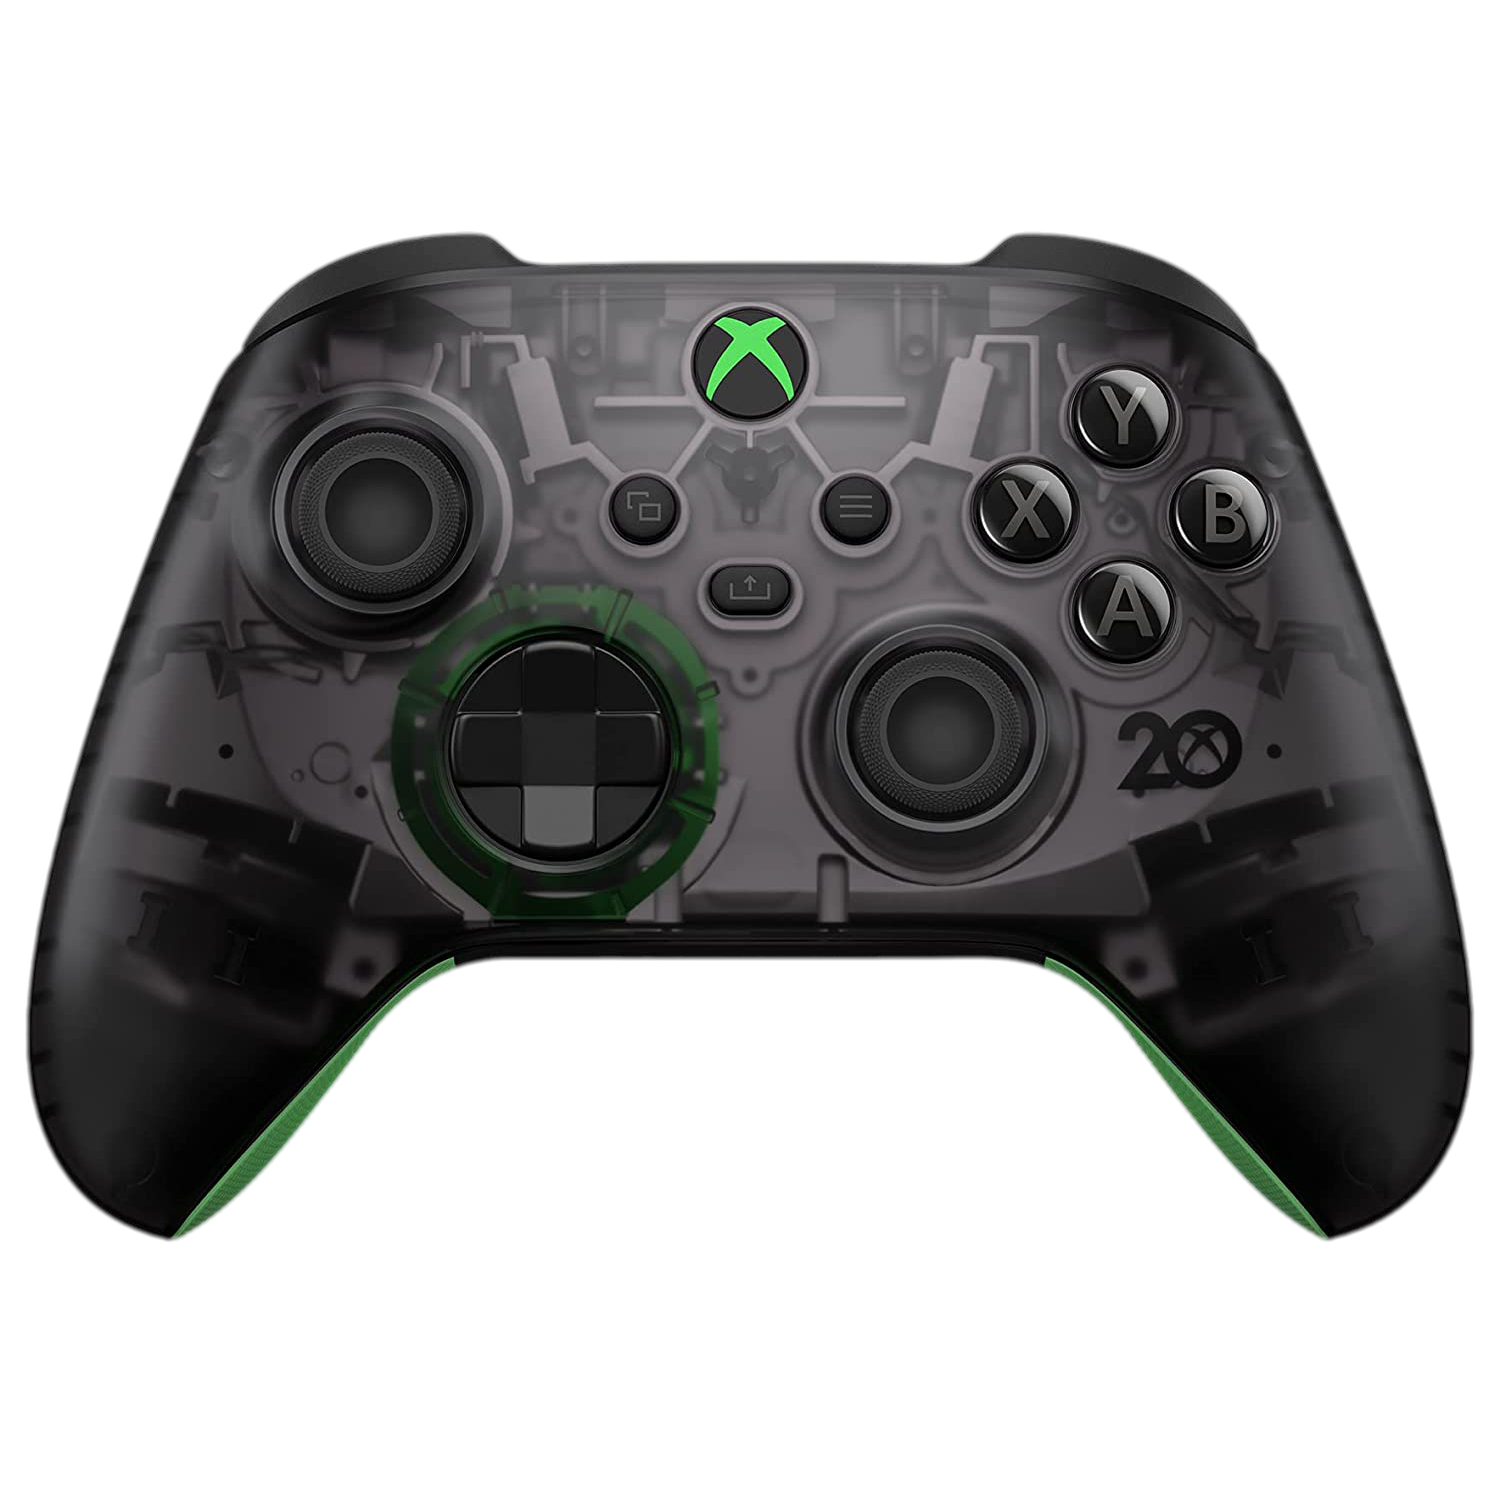 Microsoft-Official-Xbox-Series-Controller-20th-Anniversary-Limited-Edition-12-Months-Warranty_a2b094d5-7aed-4d4c-9579-058fbbb32359